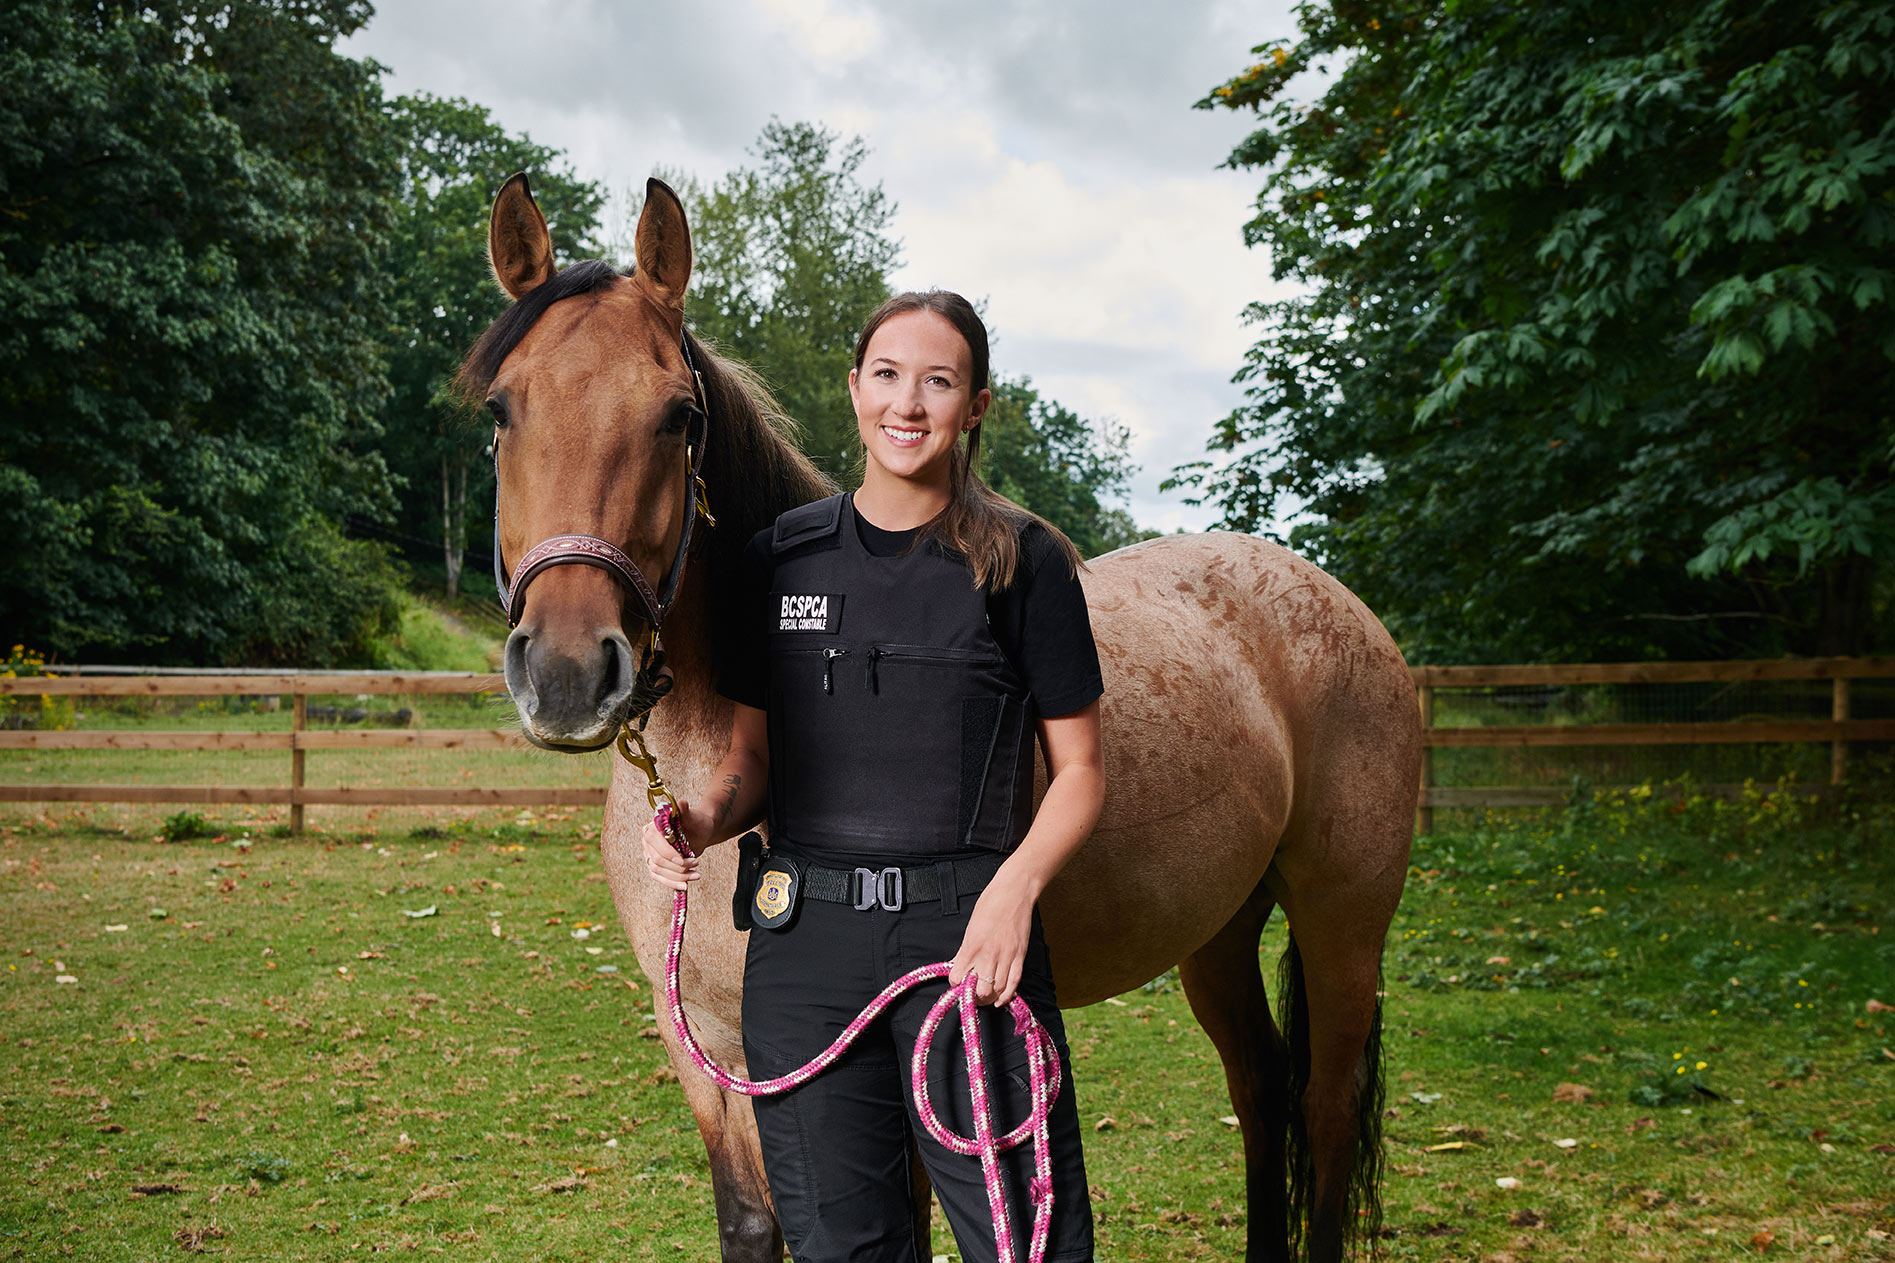 2020-Vancouver-HumansOfSupport-Photographer-ErichSaide-PassionProject-Globalmovement-COVID-19-Portrait-HumansOfSupport-FrontlineHero-HOS-SPCA-CristieSteele-Horse-TheArtofthePersonalProject